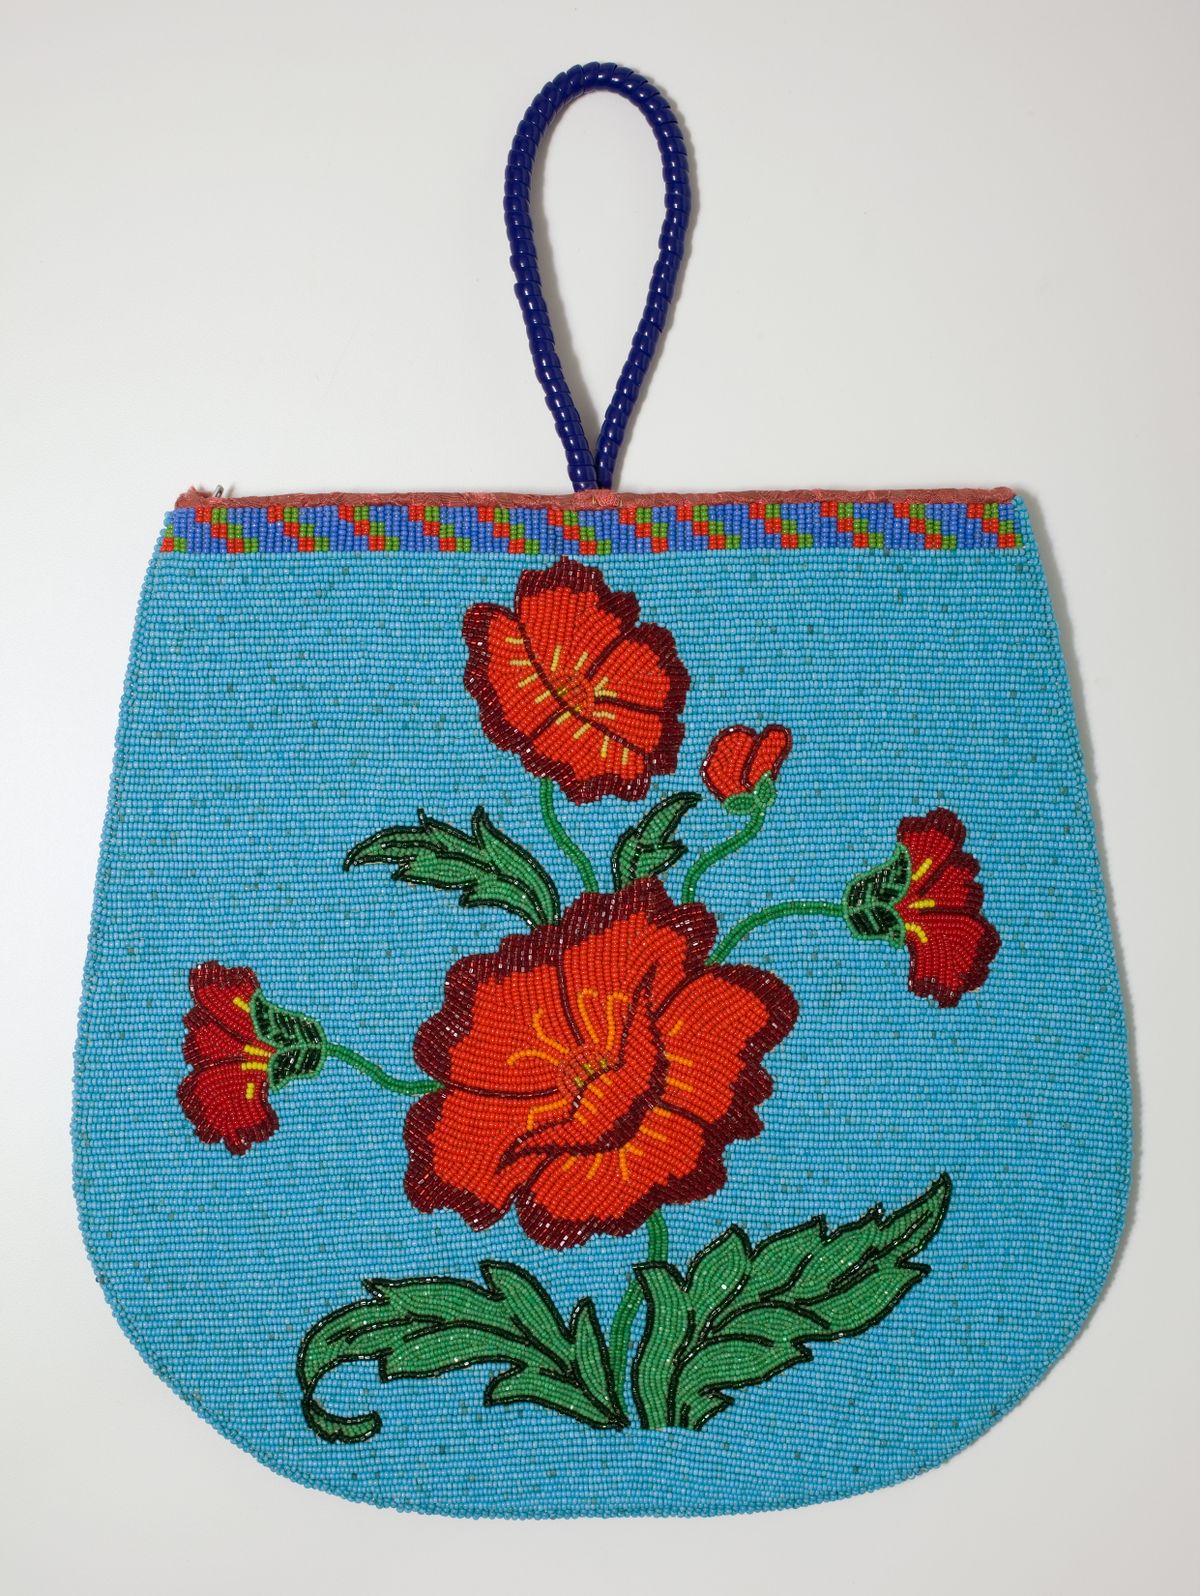 A women’s bag made in the 1950s by Elizabeth Leach Quintana, a member of the Spokane Tribe.  (Northwest Museum of Arts and Culture)